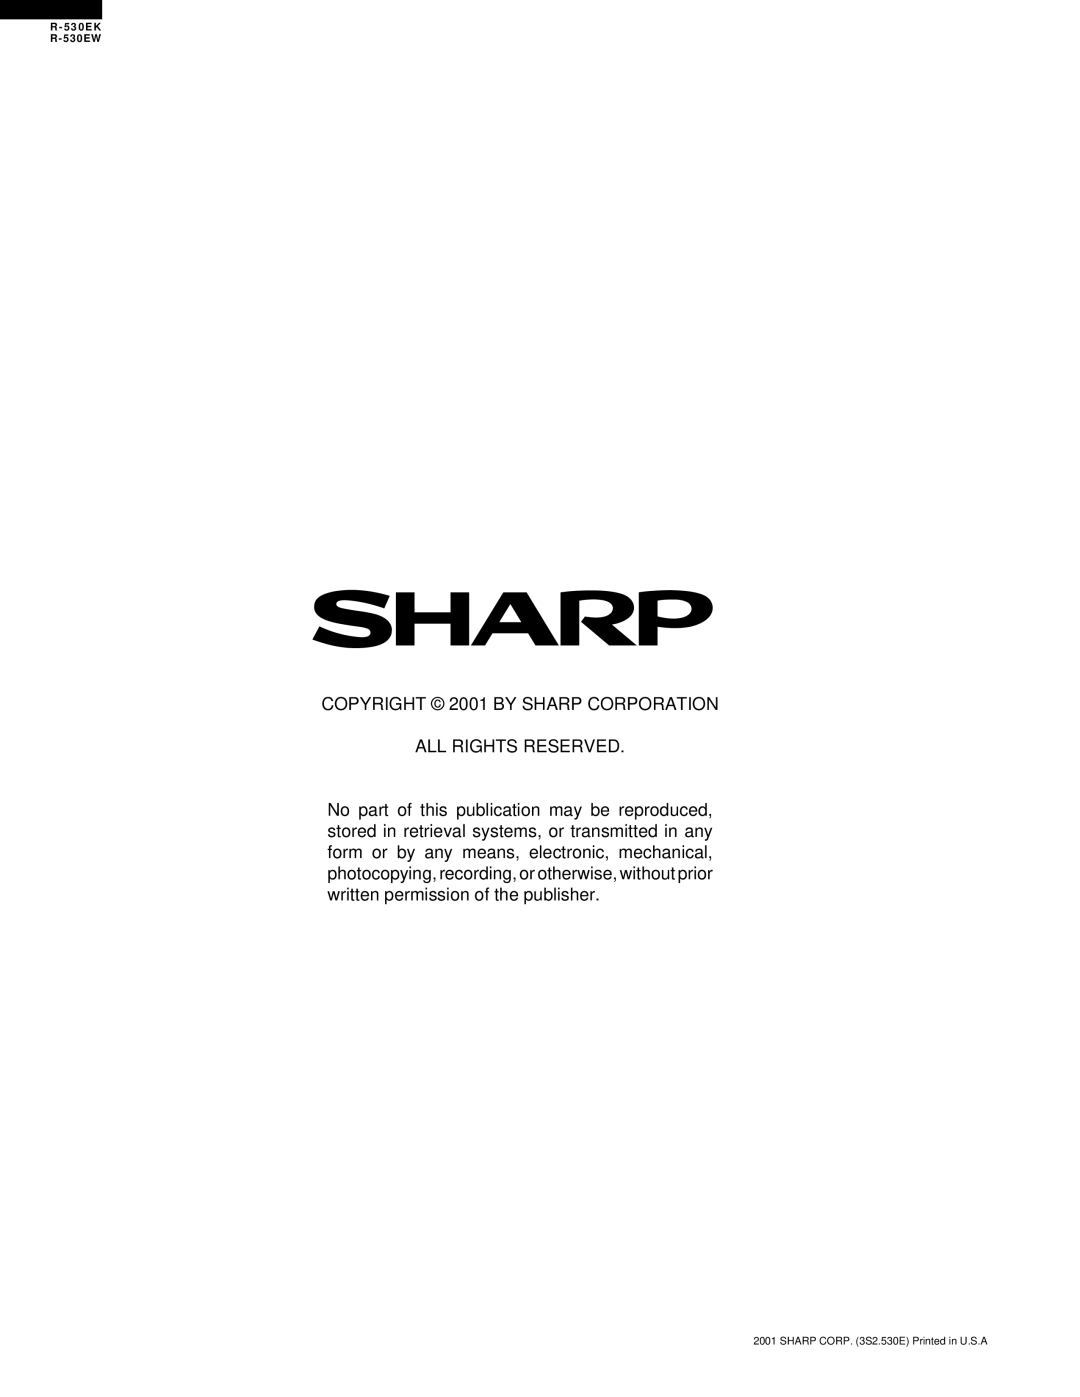 Sharp R-530EK service manual COPYRIGHT 2001 BY SHARP CORPORATION ALL RIGHTS RESERVED, R - 5 3 0 E K R - 530EW 